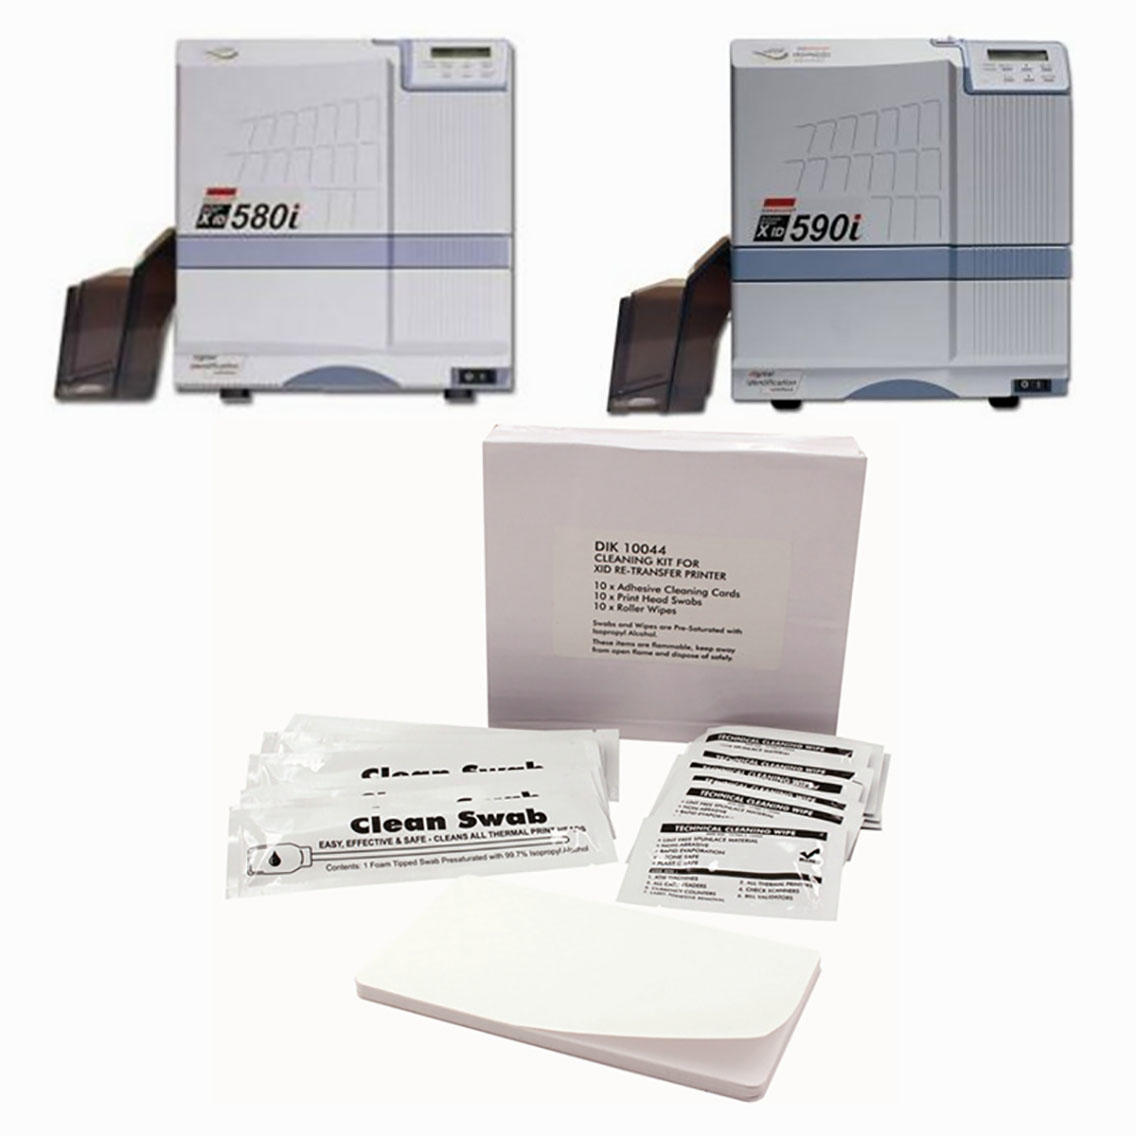 Cleanmo good quality Matica DRY Cleaning Cards factory for XID 580i printer